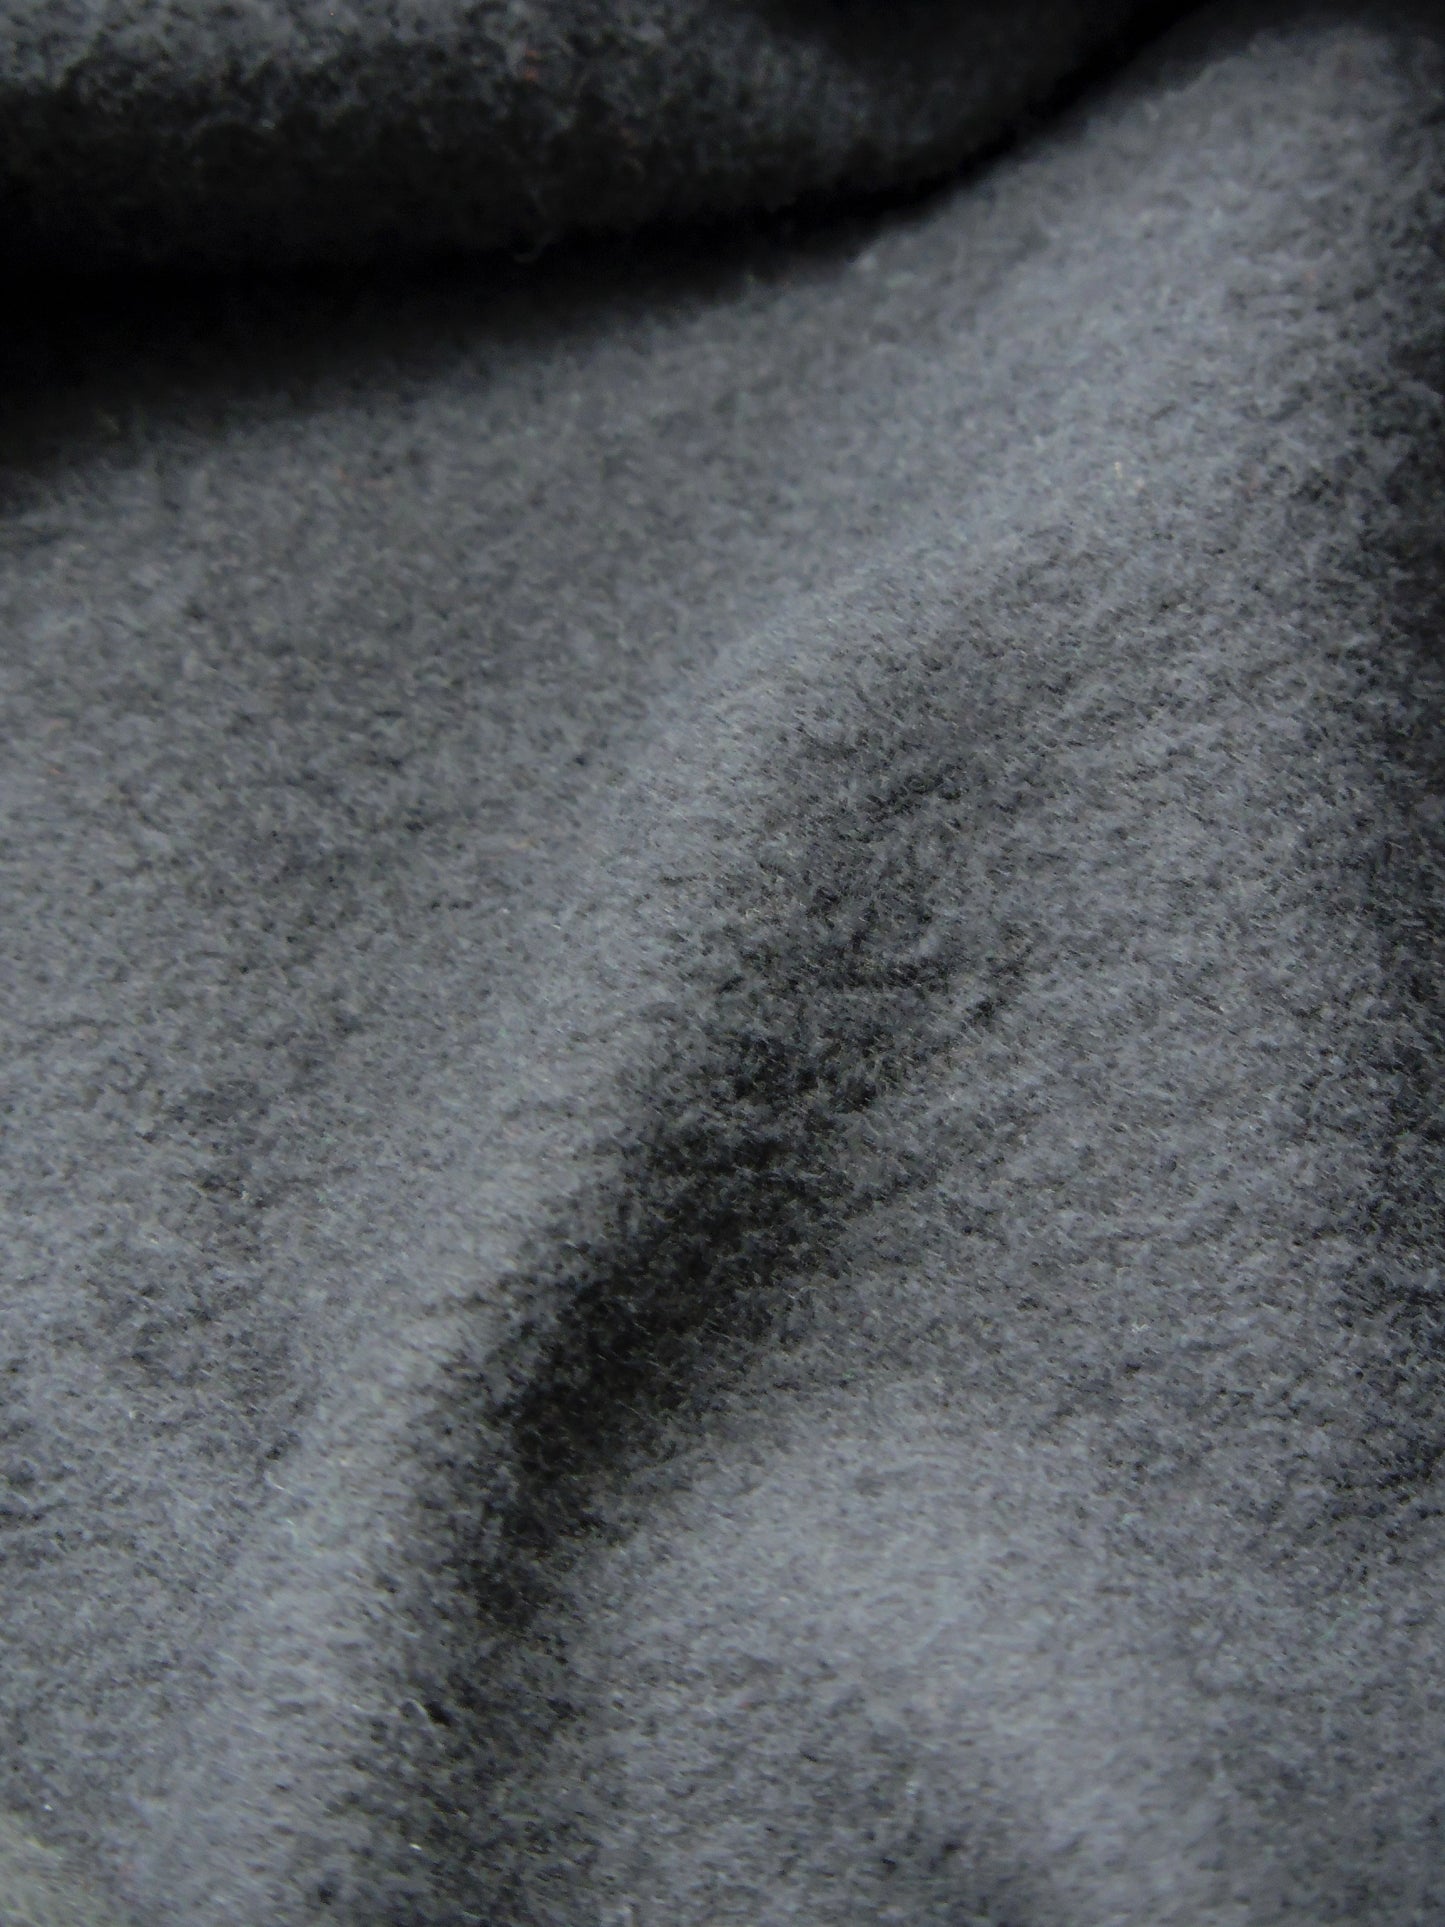 Extreme close up of the fleece material, showing soft texture.